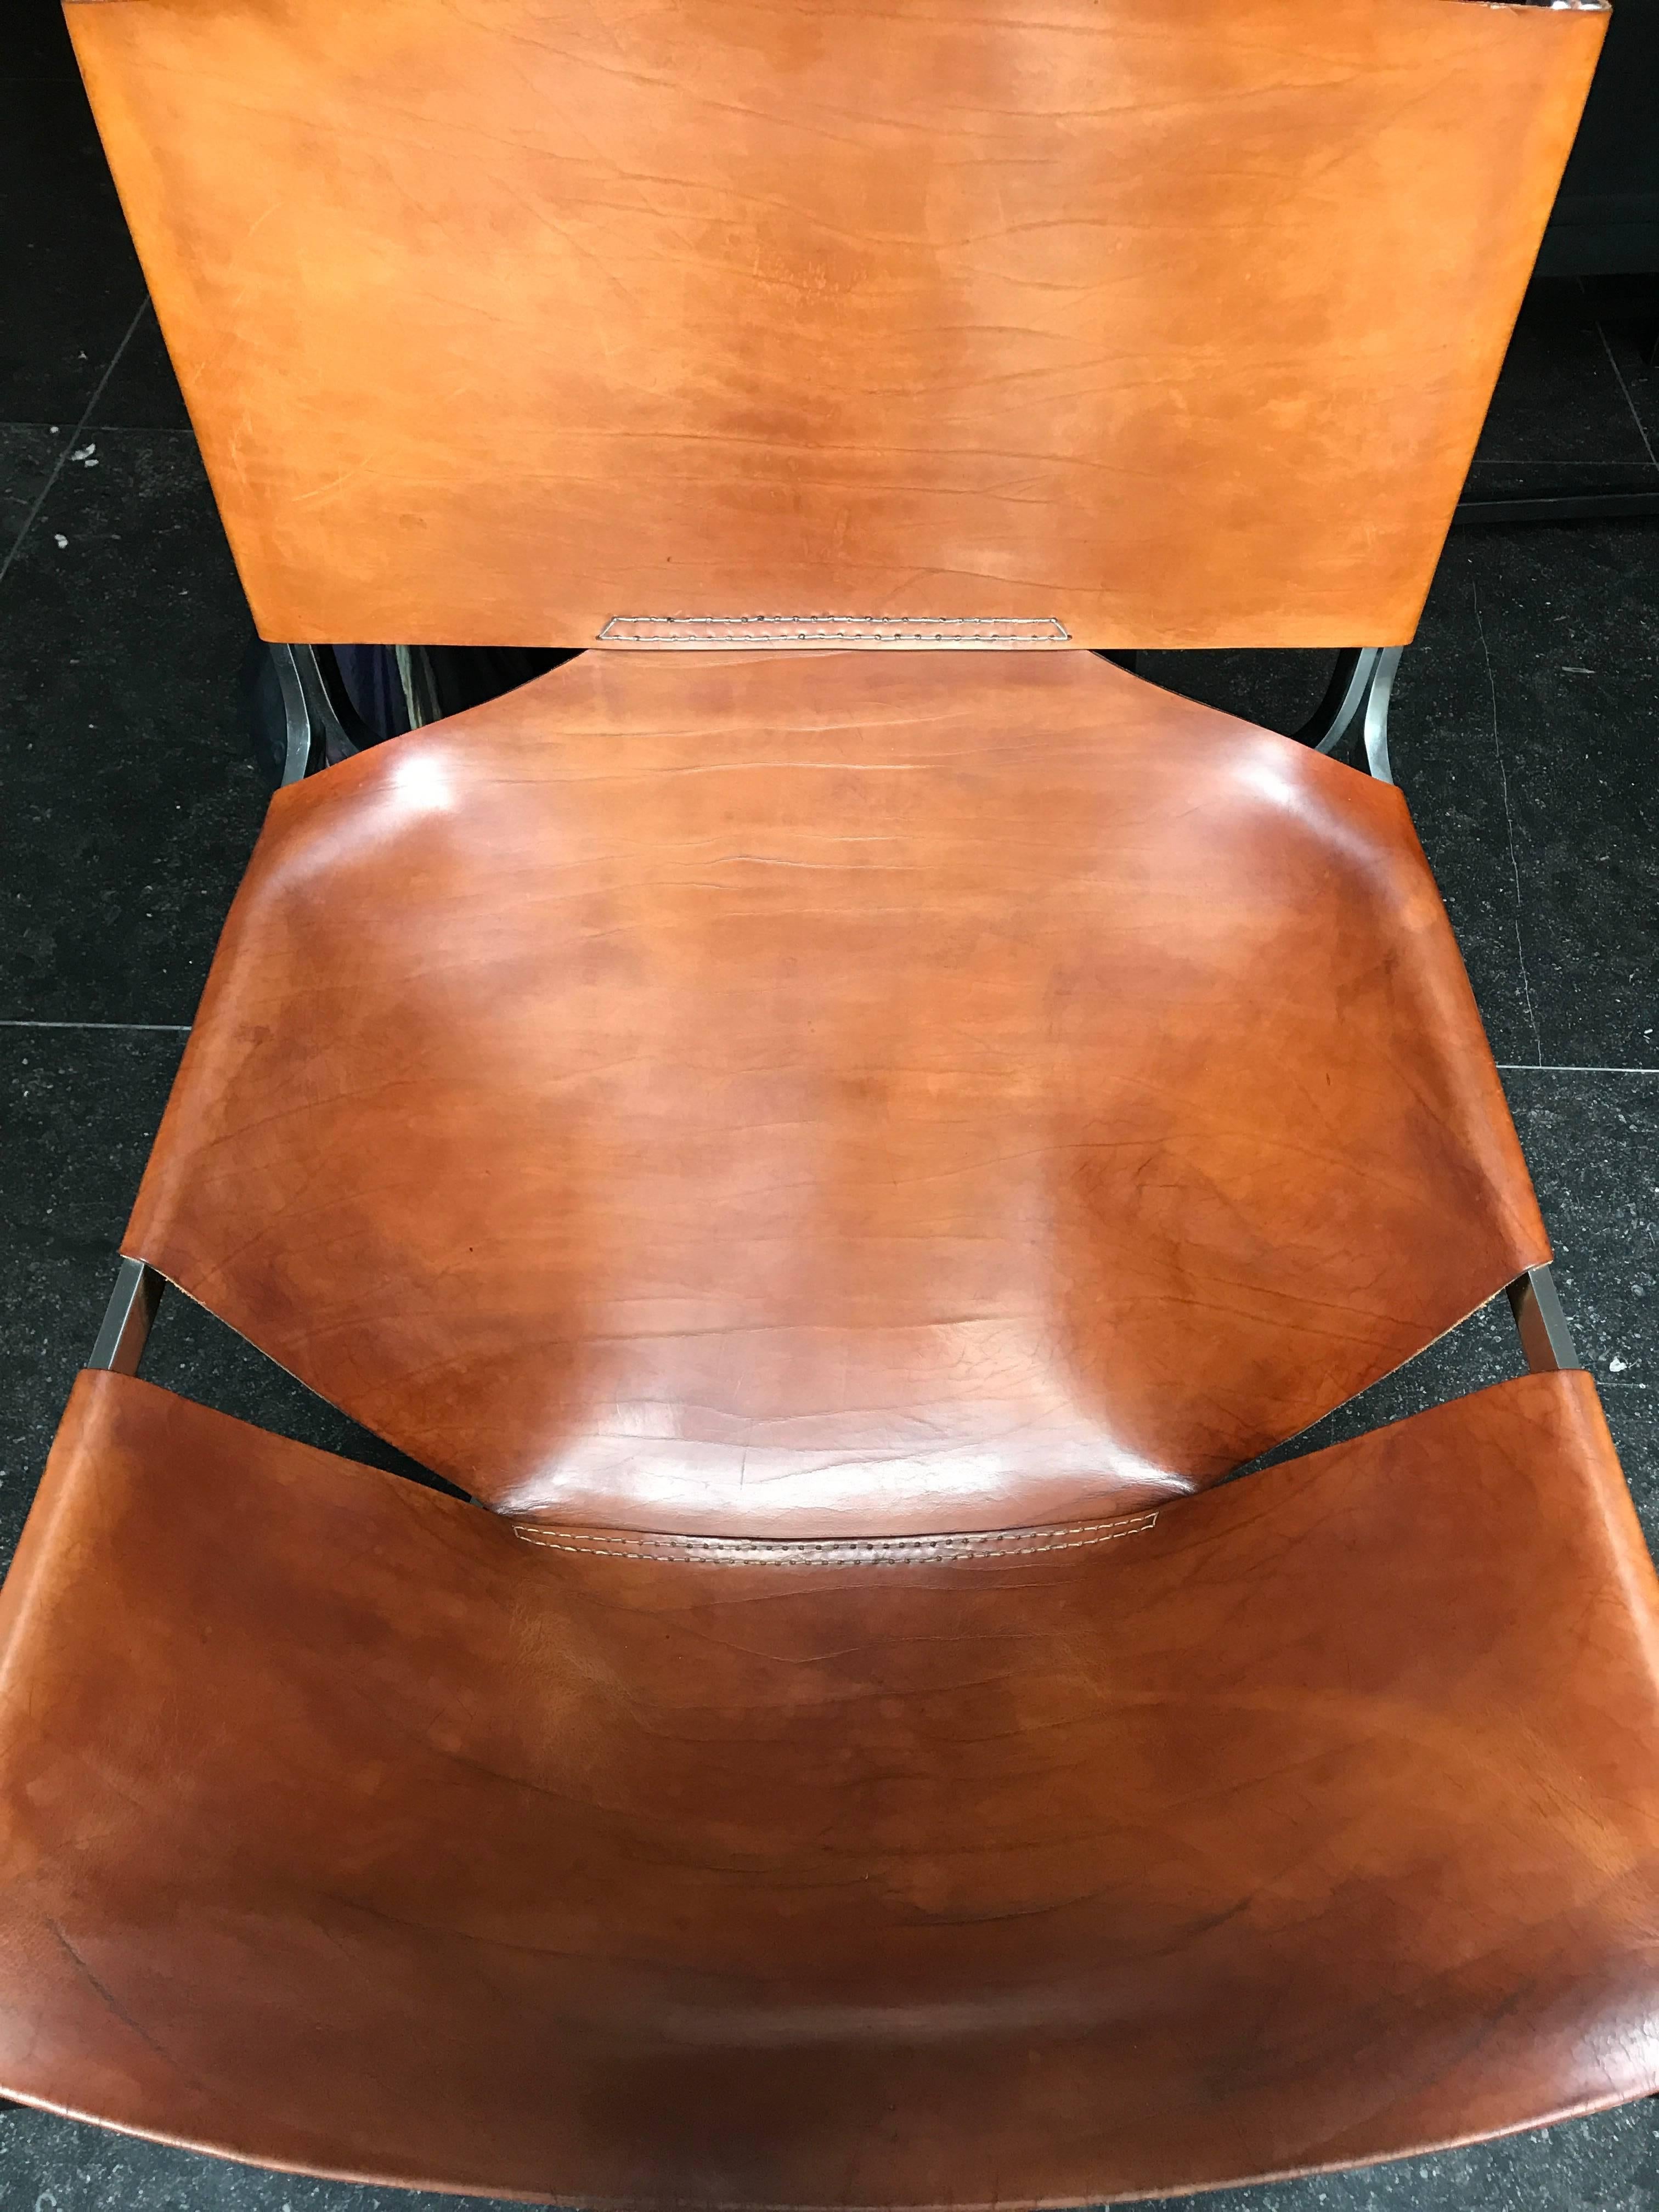 F444 lounge chair designed by Pierre Paulin (1927-2009) for Artifort in 1963

First edition F444 with very nice patinated and original brown saddle leather 
The original natural brown saddle leather was colored and stained by age and usage.
This